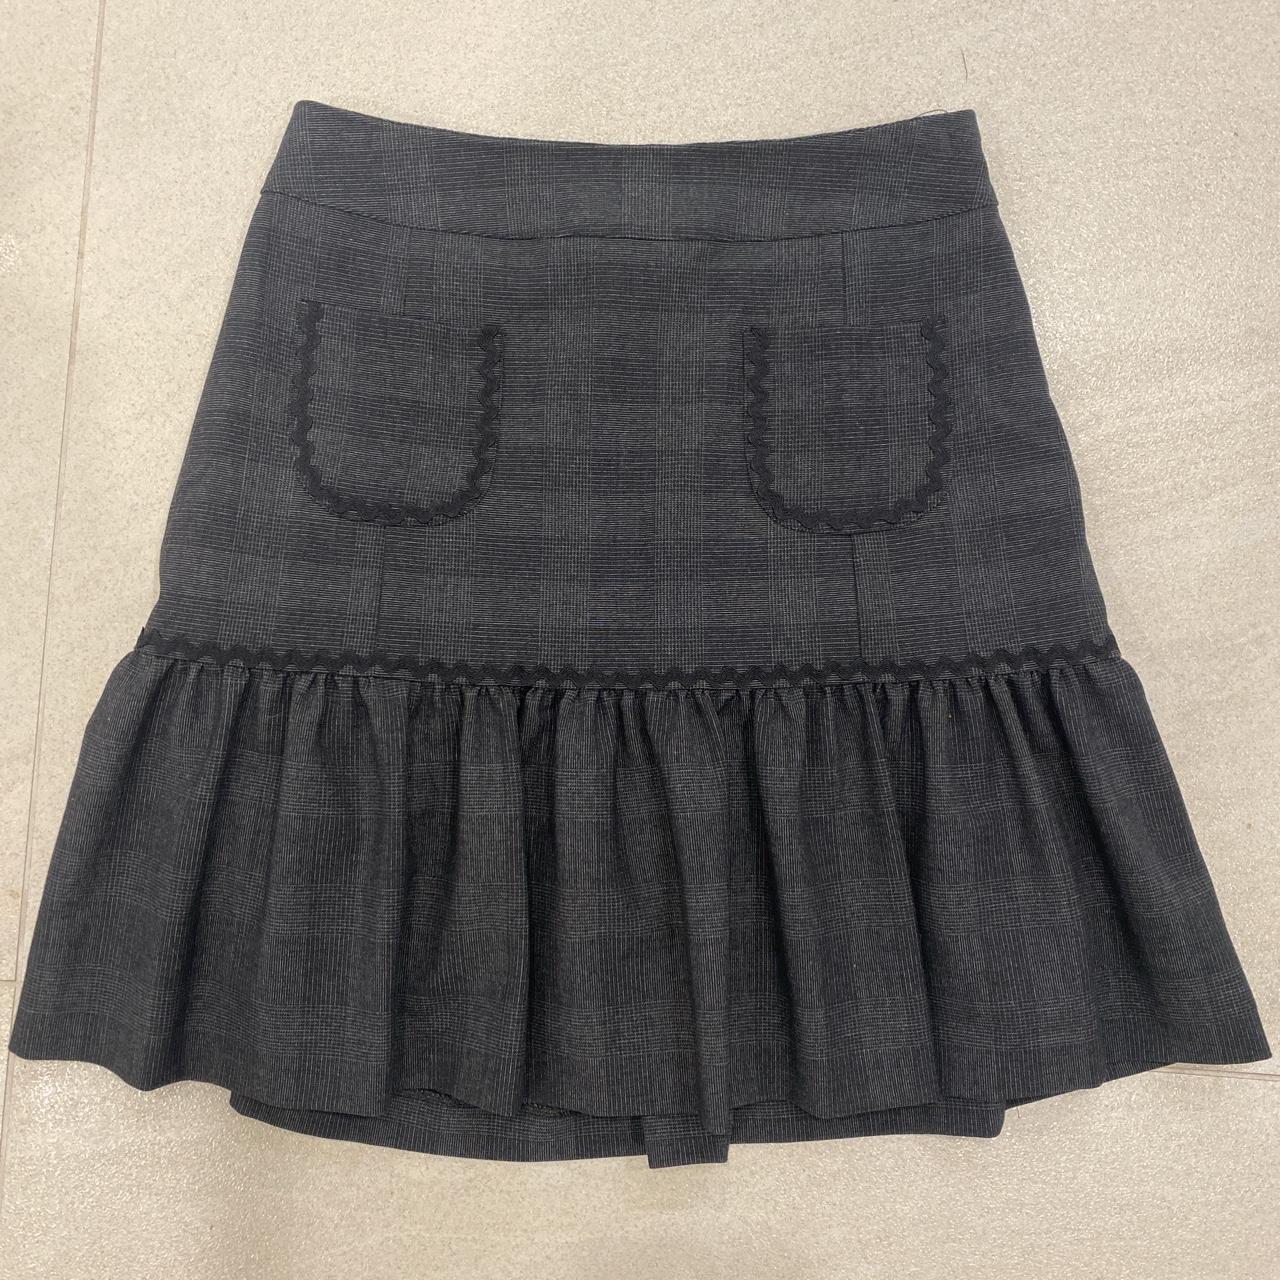 Review Women's Grey and Black Skirt | Depop